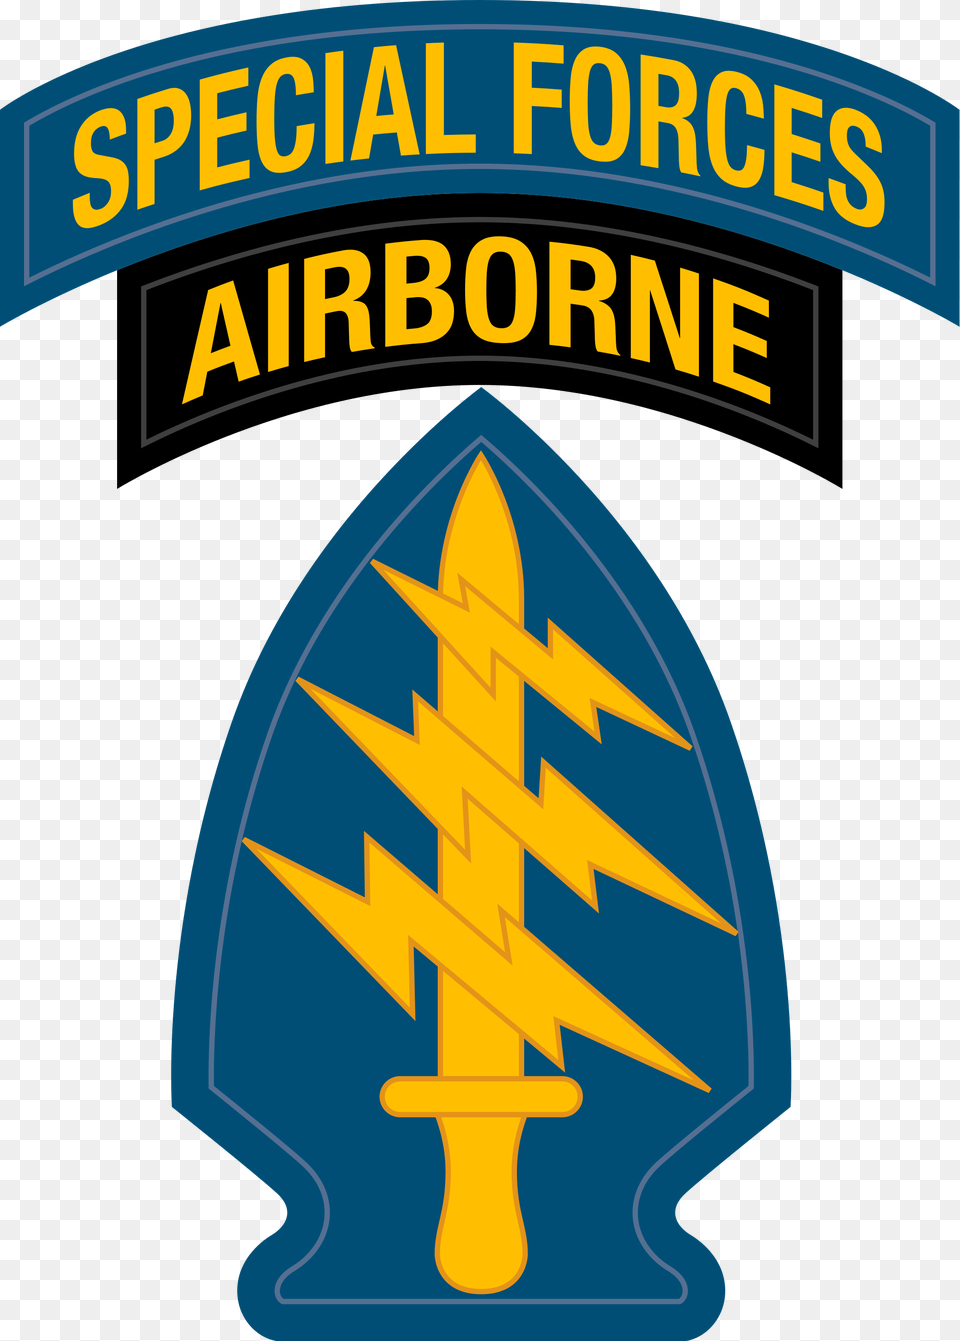 United Nations Army Special Forces Special Forces Airborne Logo, Badge, Symbol Png